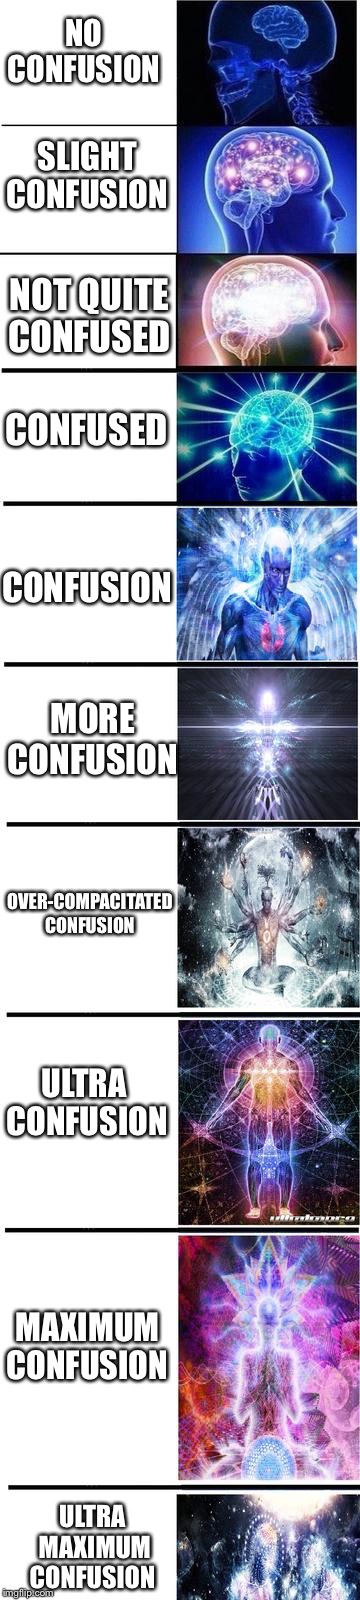 Confusion | NO CONFUSION; SLIGHT CONFUSION; NOT QUITE CONFUSED; CONFUSED; CONFUSION; MORE CONFUSION; OVER-COMPACITATED CONFUSION; ULTRA CONFUSION; MAXIMUM CONFUSION; ULTRA MAXIMUM CONFUSION | image tagged in expanding brain,confused,confusion,memes,confusing,brain mind expanding | made w/ Imgflip meme maker